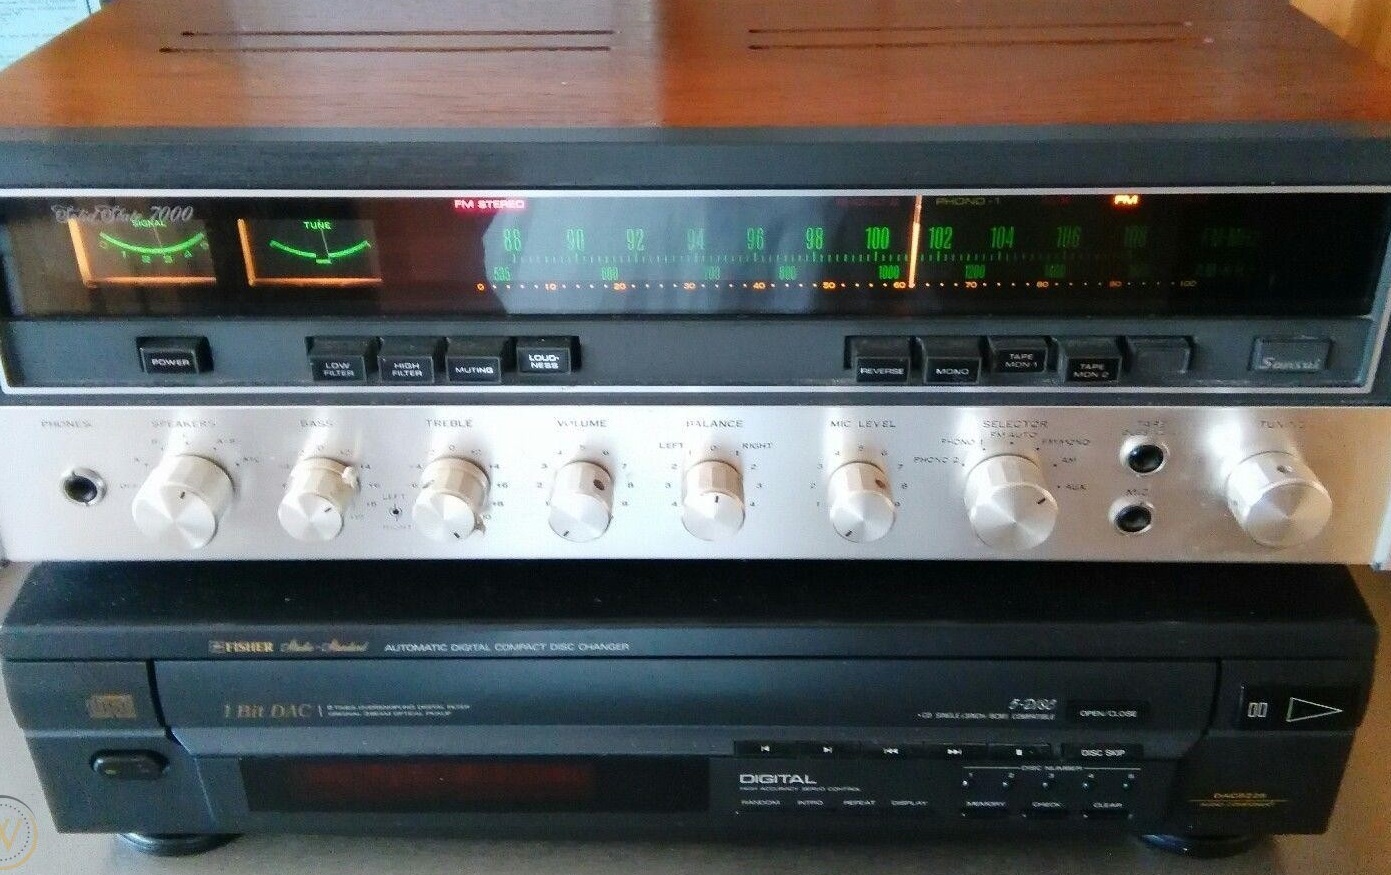 What are channels on a stereo receiver?